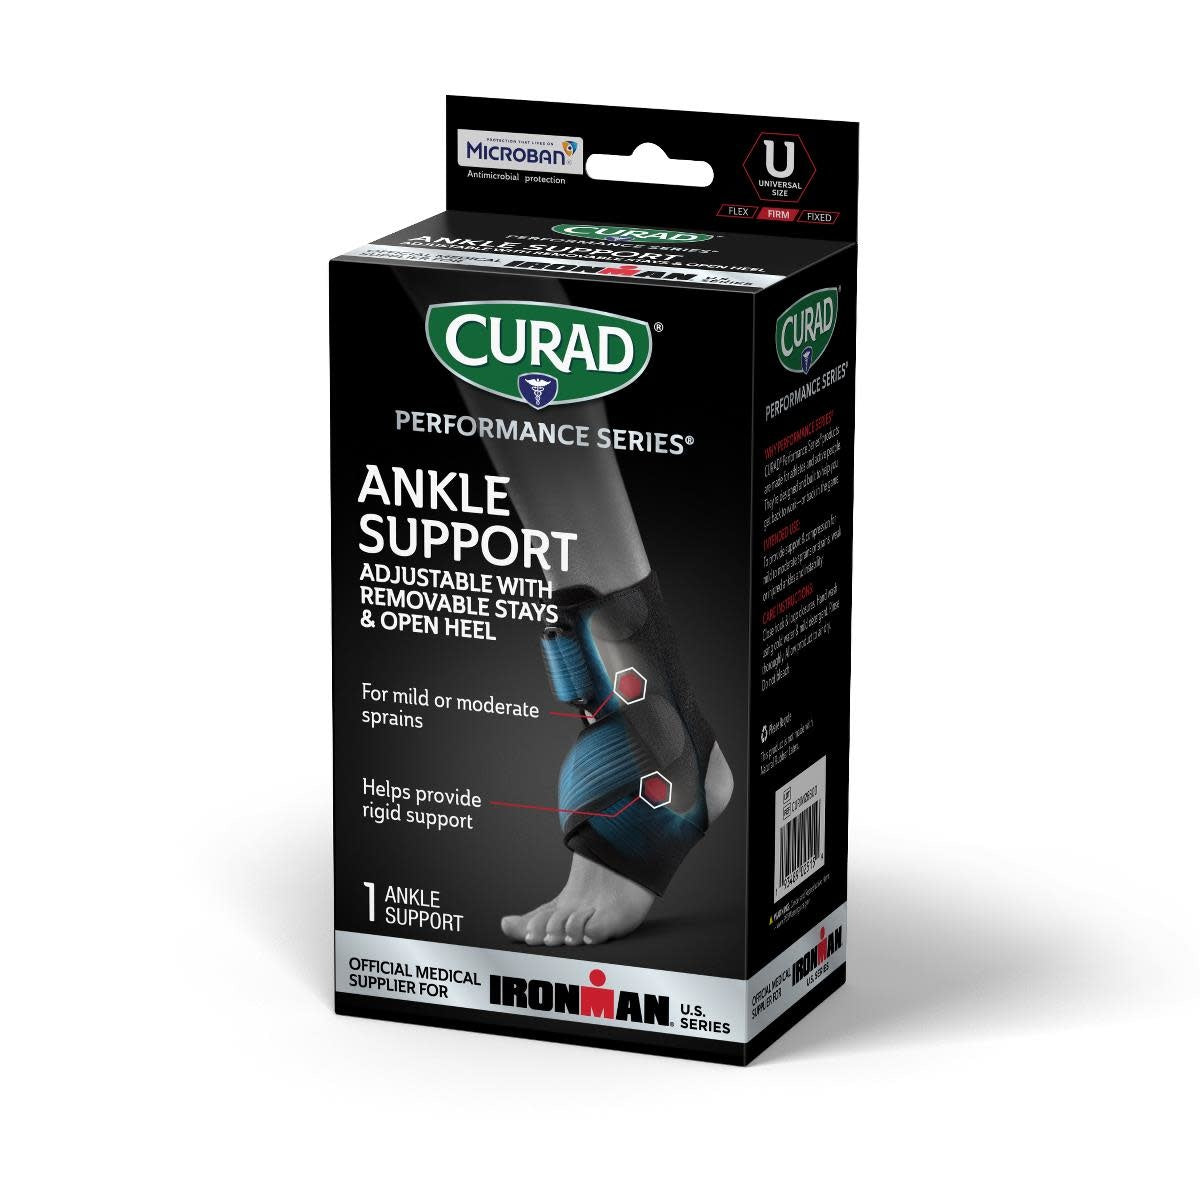 CURAD Performance Series IRONMAN Ankle Support with Removable Stays, Adjustable